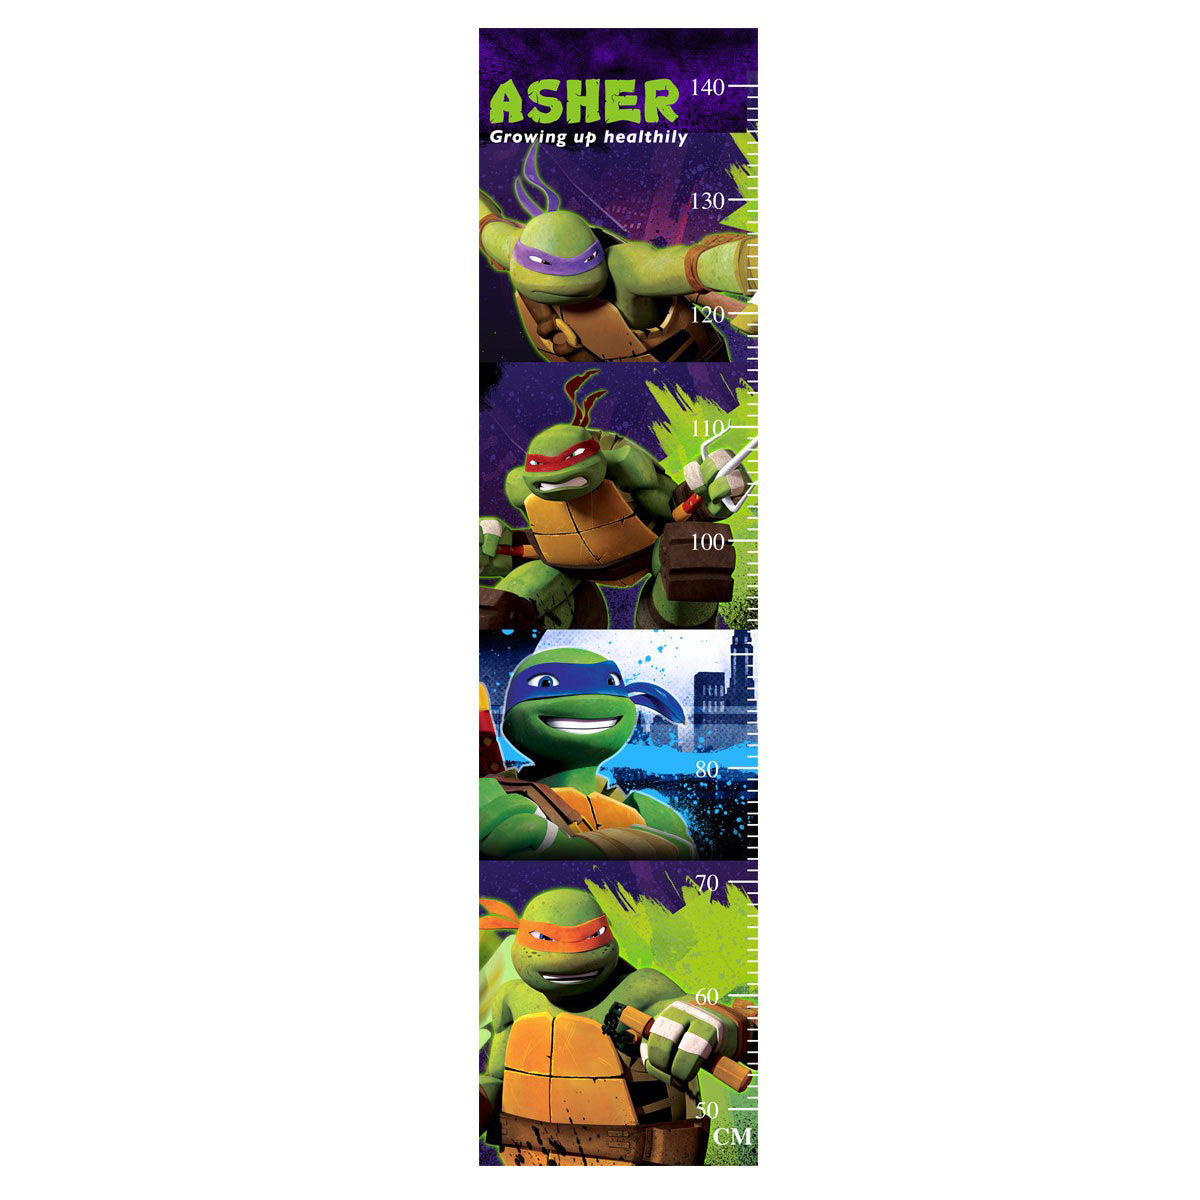 Join Leonardo, Raphael, Michelangelo and Donatello  for some fighting action on this personalised growth chart.